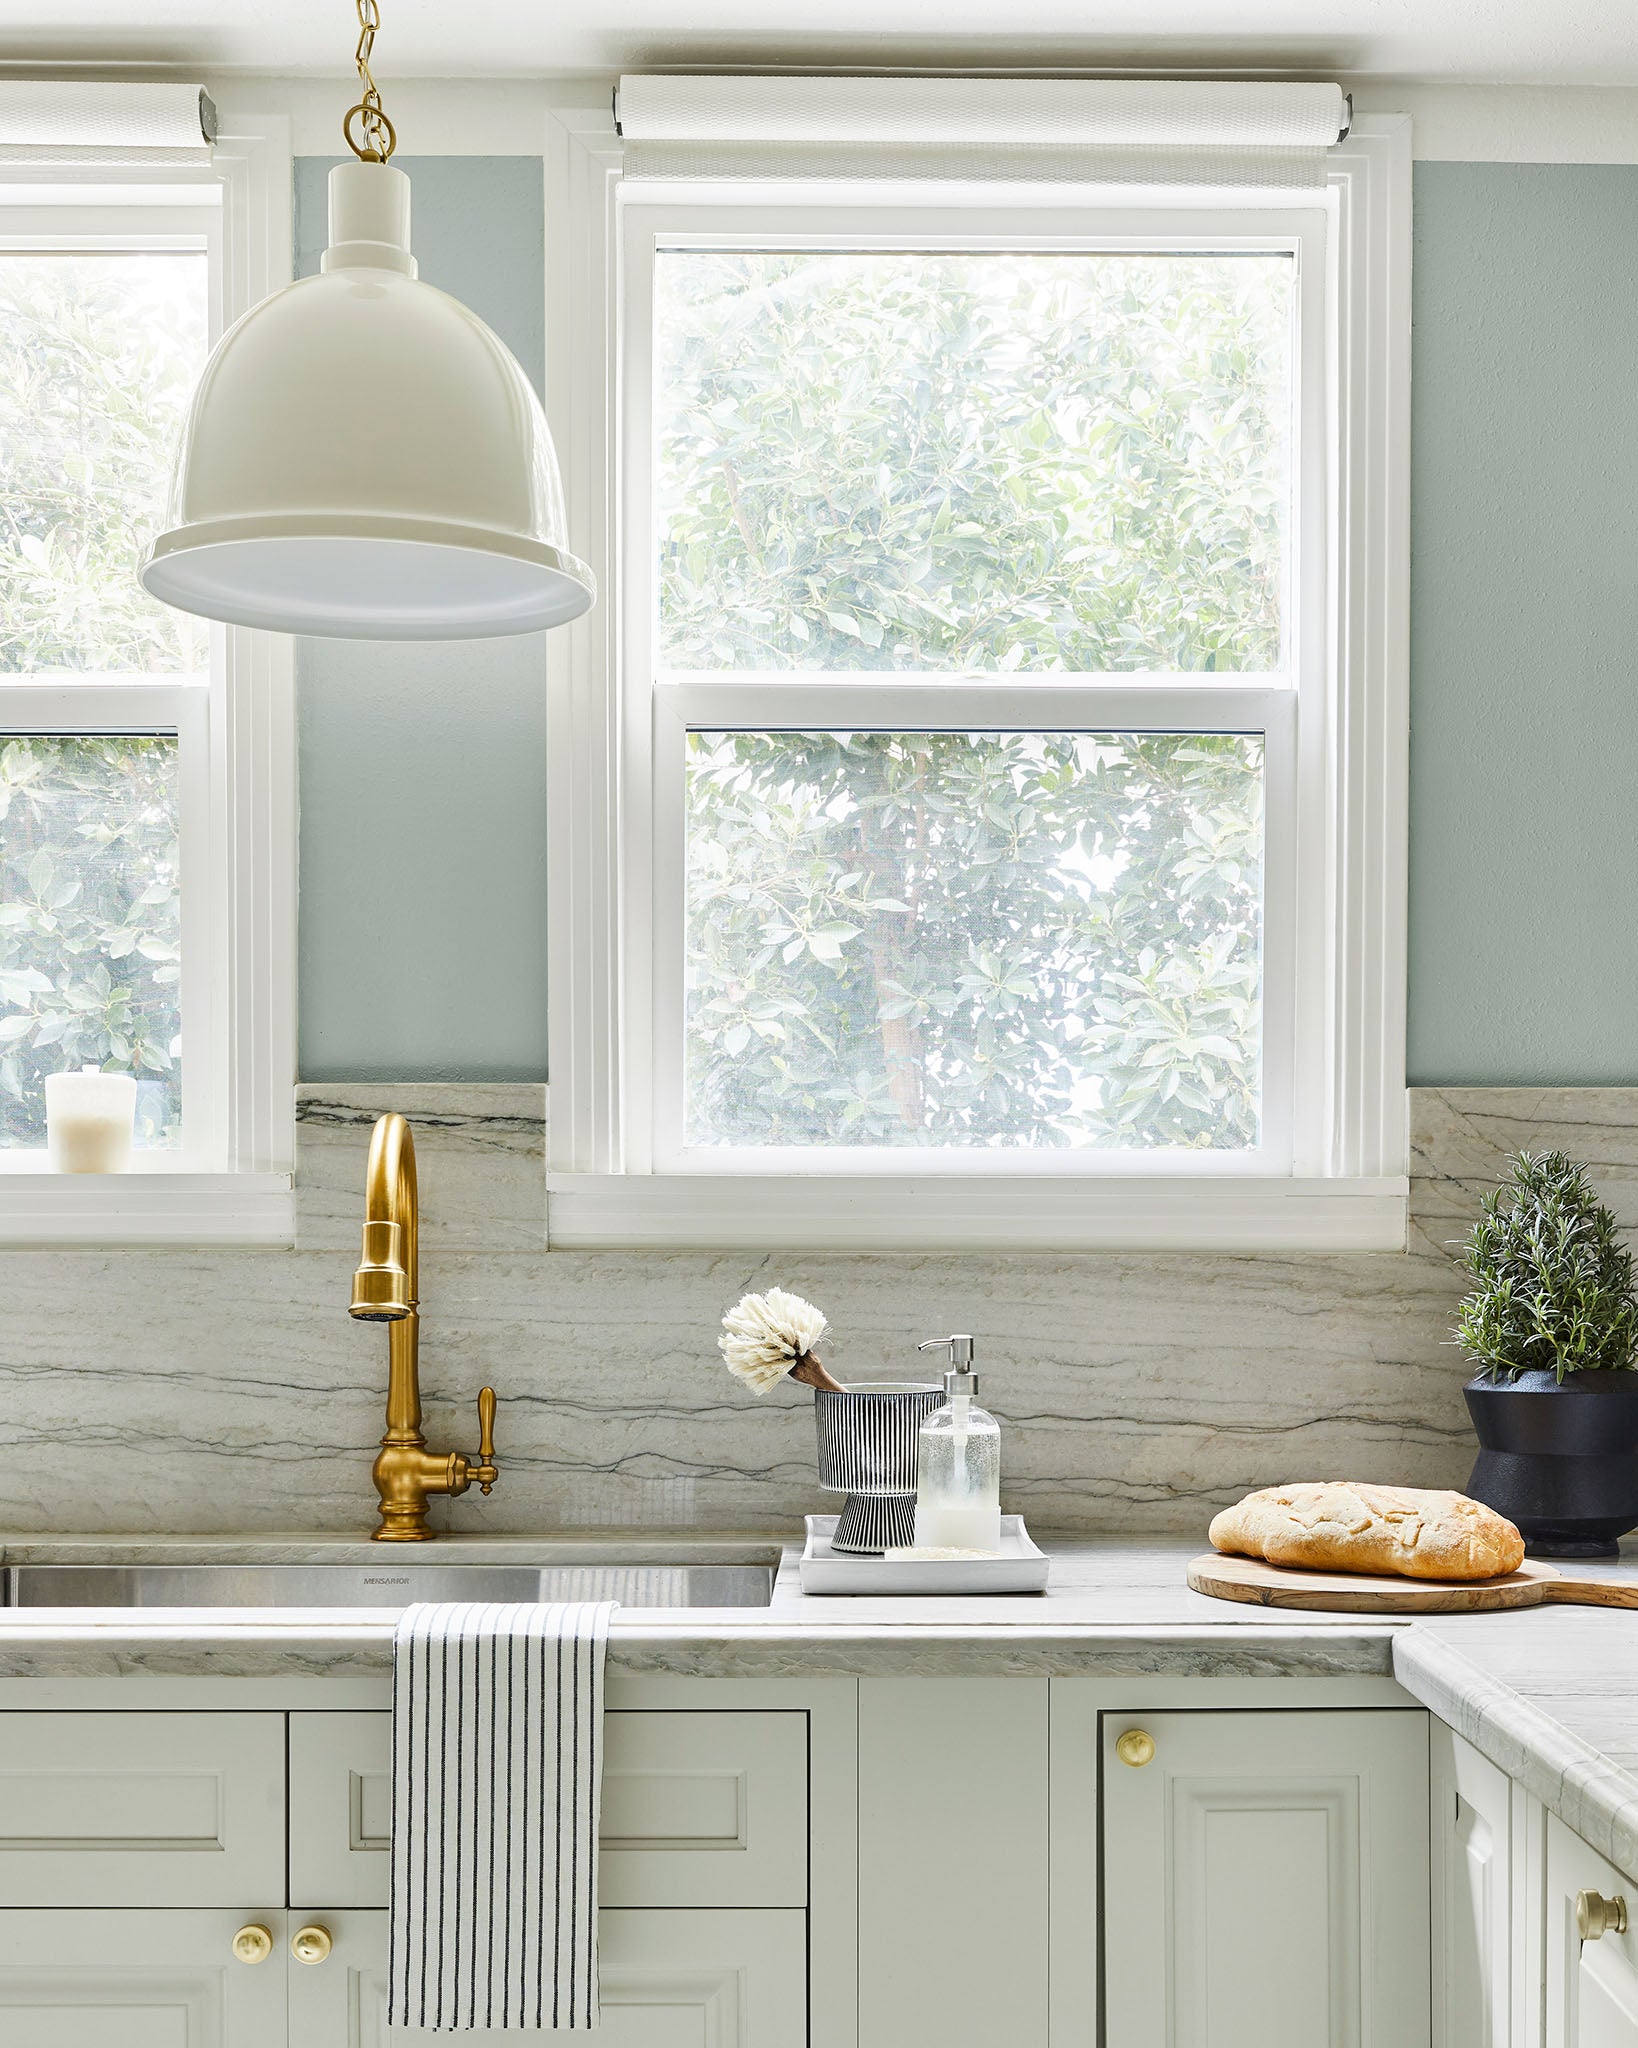 You'd never guess this was faux marble - a budget-friendly kitchen reno success.